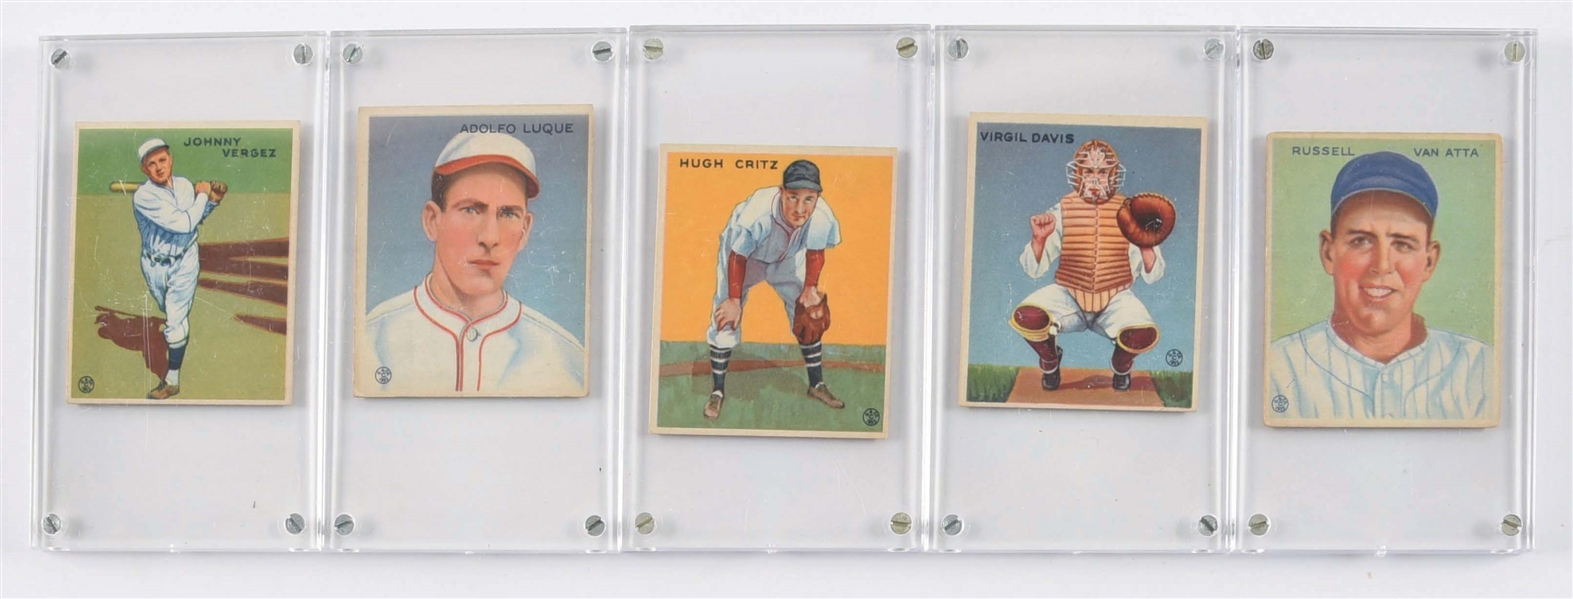 LOT OF 5: 1933 GOUDEY BASEBALL PLAYER CARDS.